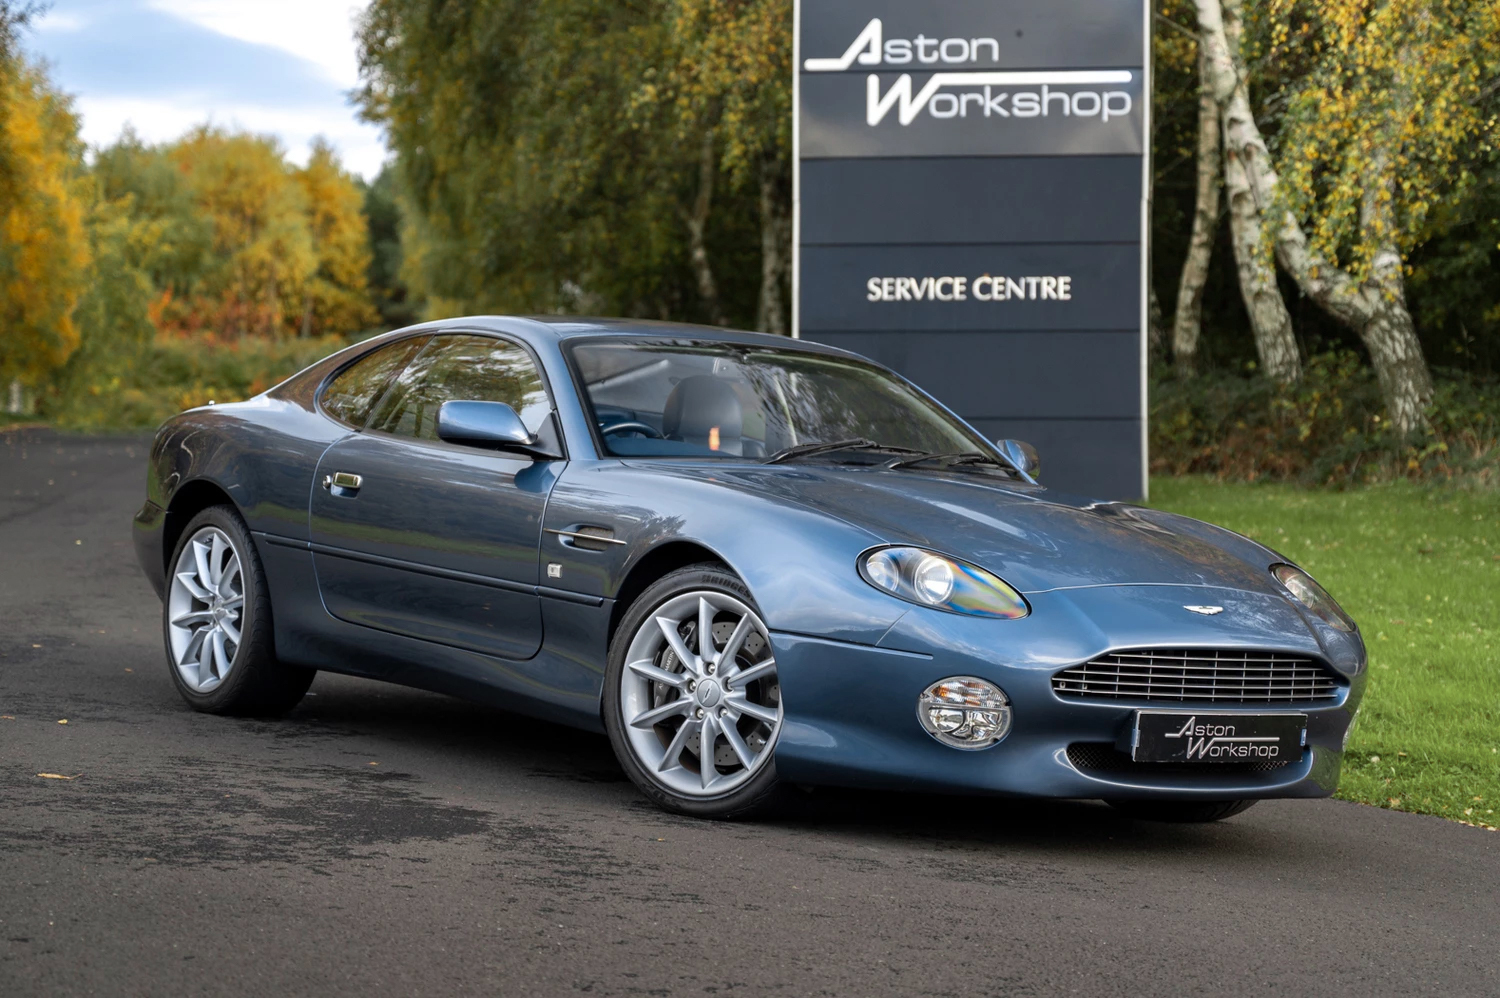 DB7 Vantage Anniversary Edition 2004 for sale from the Aston Workshop  AW110422